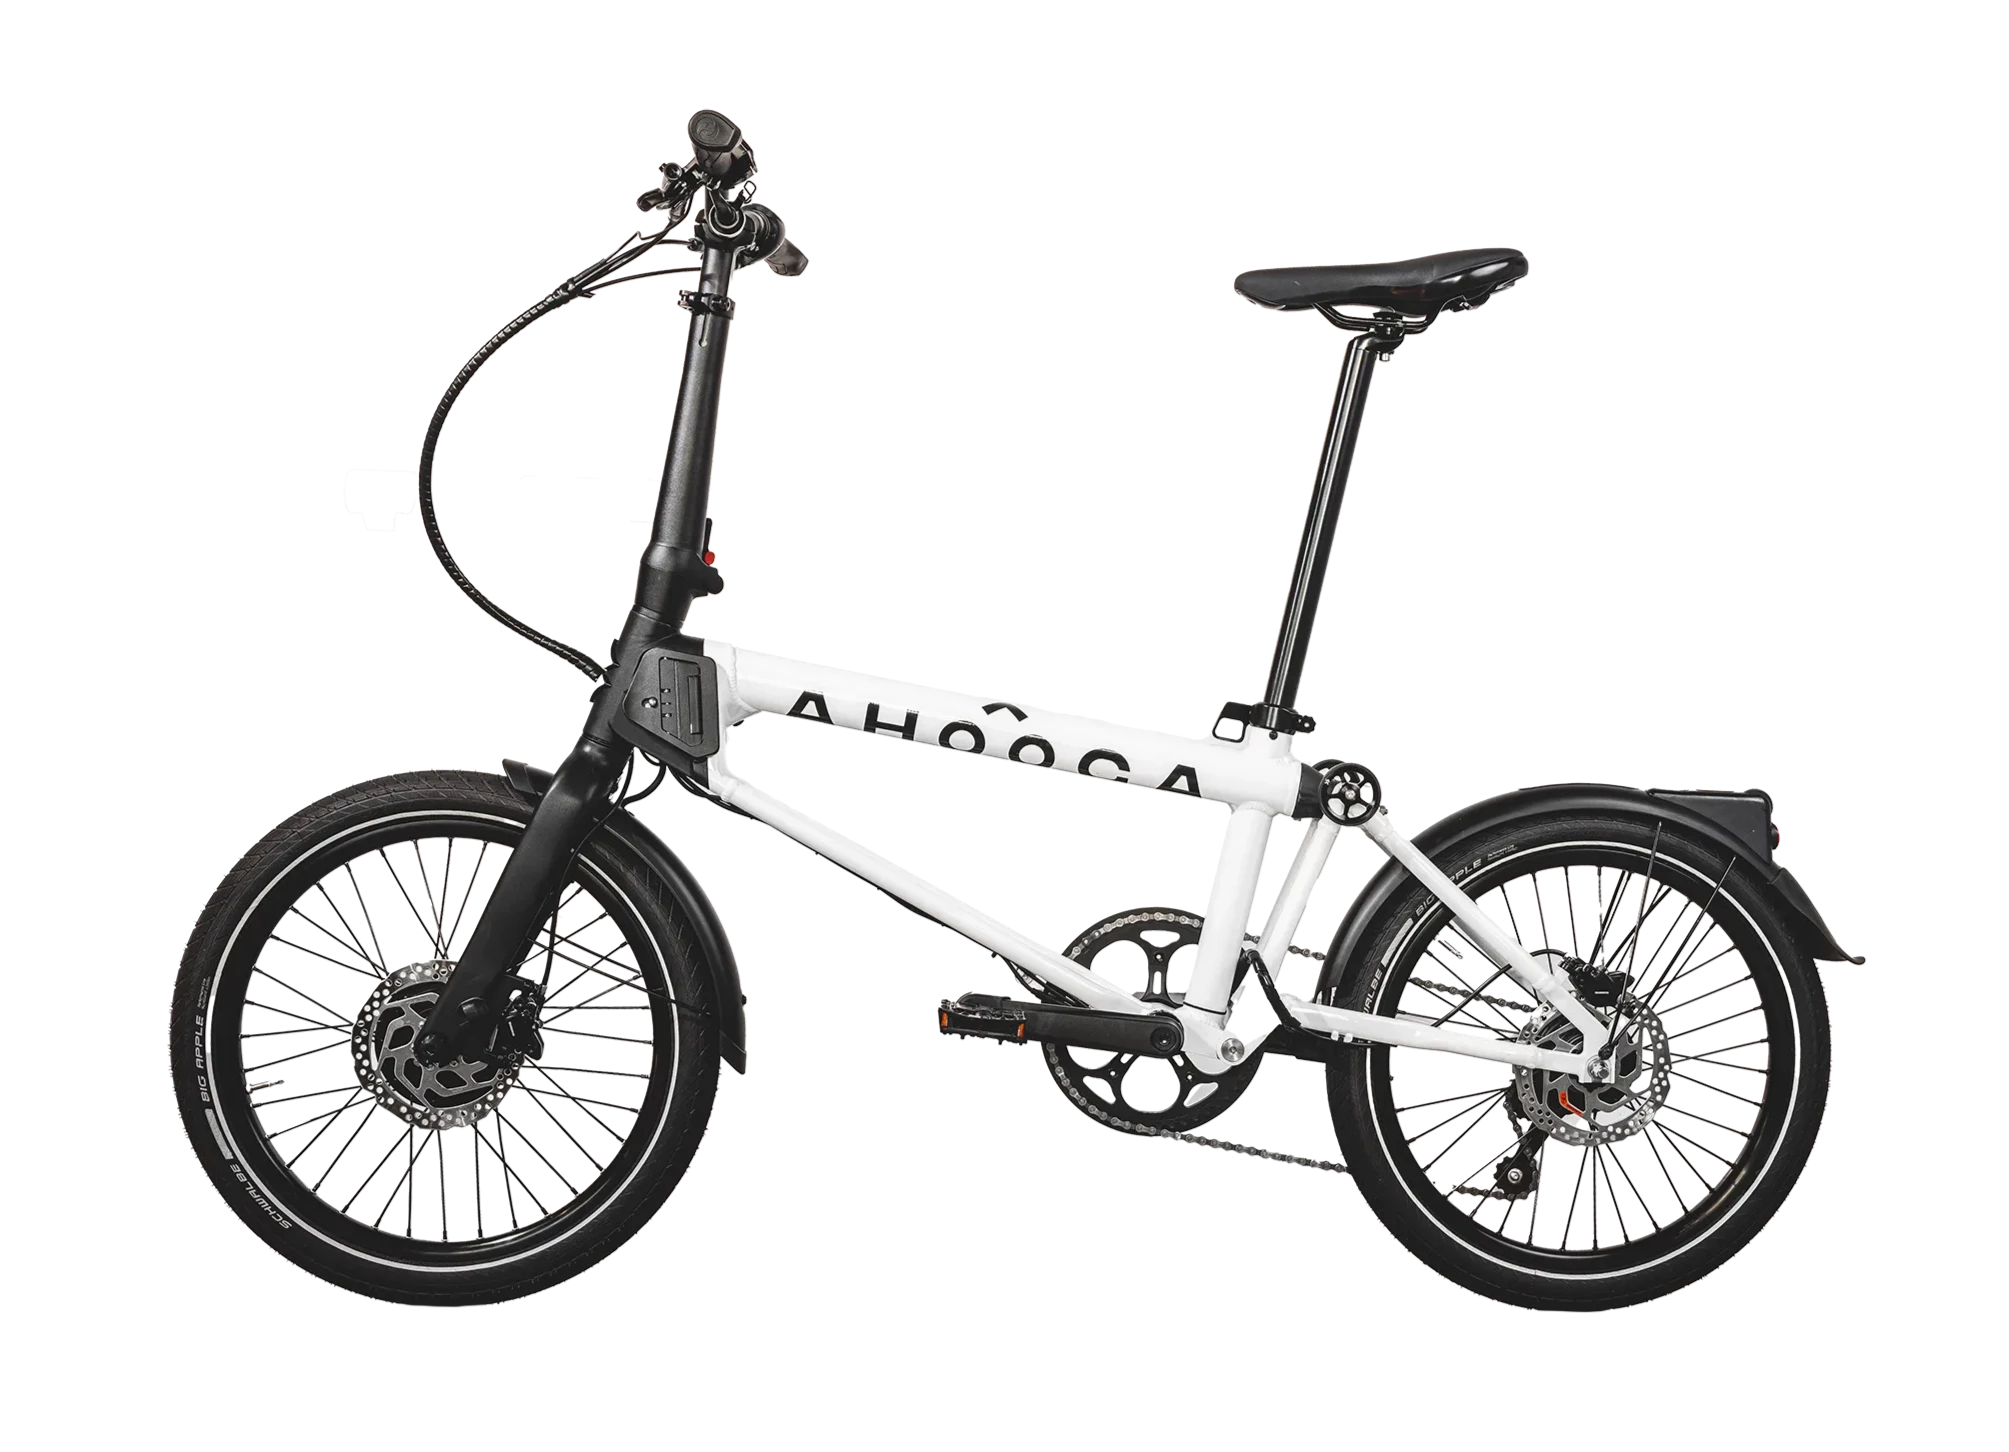 A product image of the Ahooga Max folding electric bike showing the left side of the bike. The bike frame is white with black accents. The Ahooga Max folding electric bike is available to buy from Bleeper.